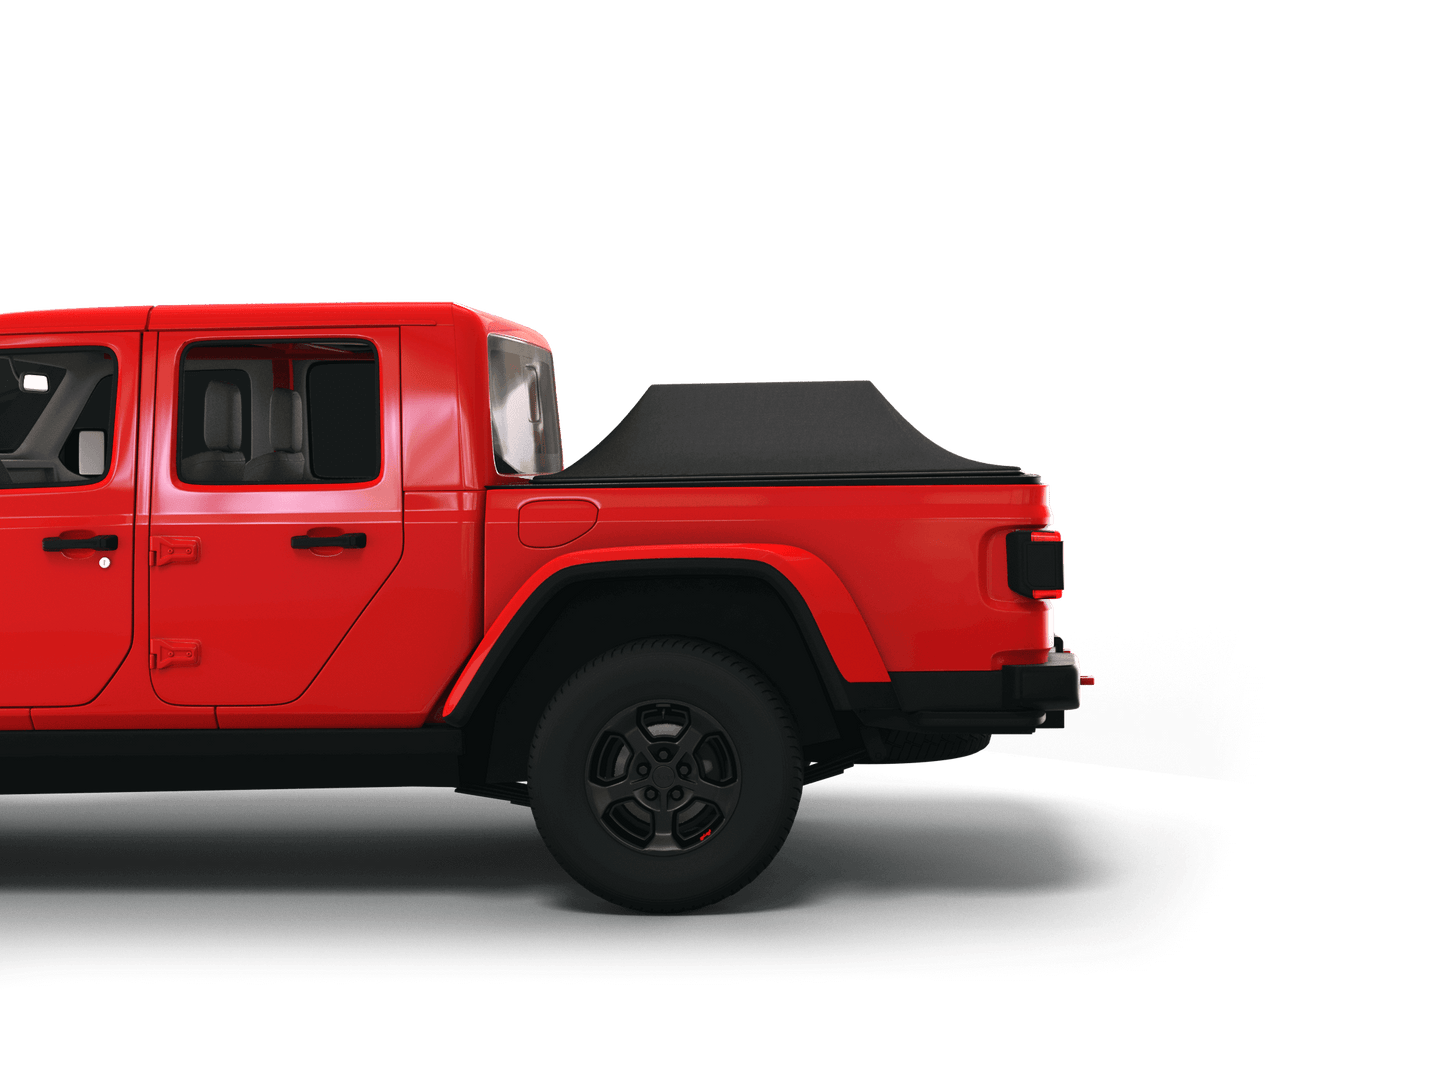 Red Jeep Gladiator with Sawtooth Stretch tonneau cover expanded over cargo load